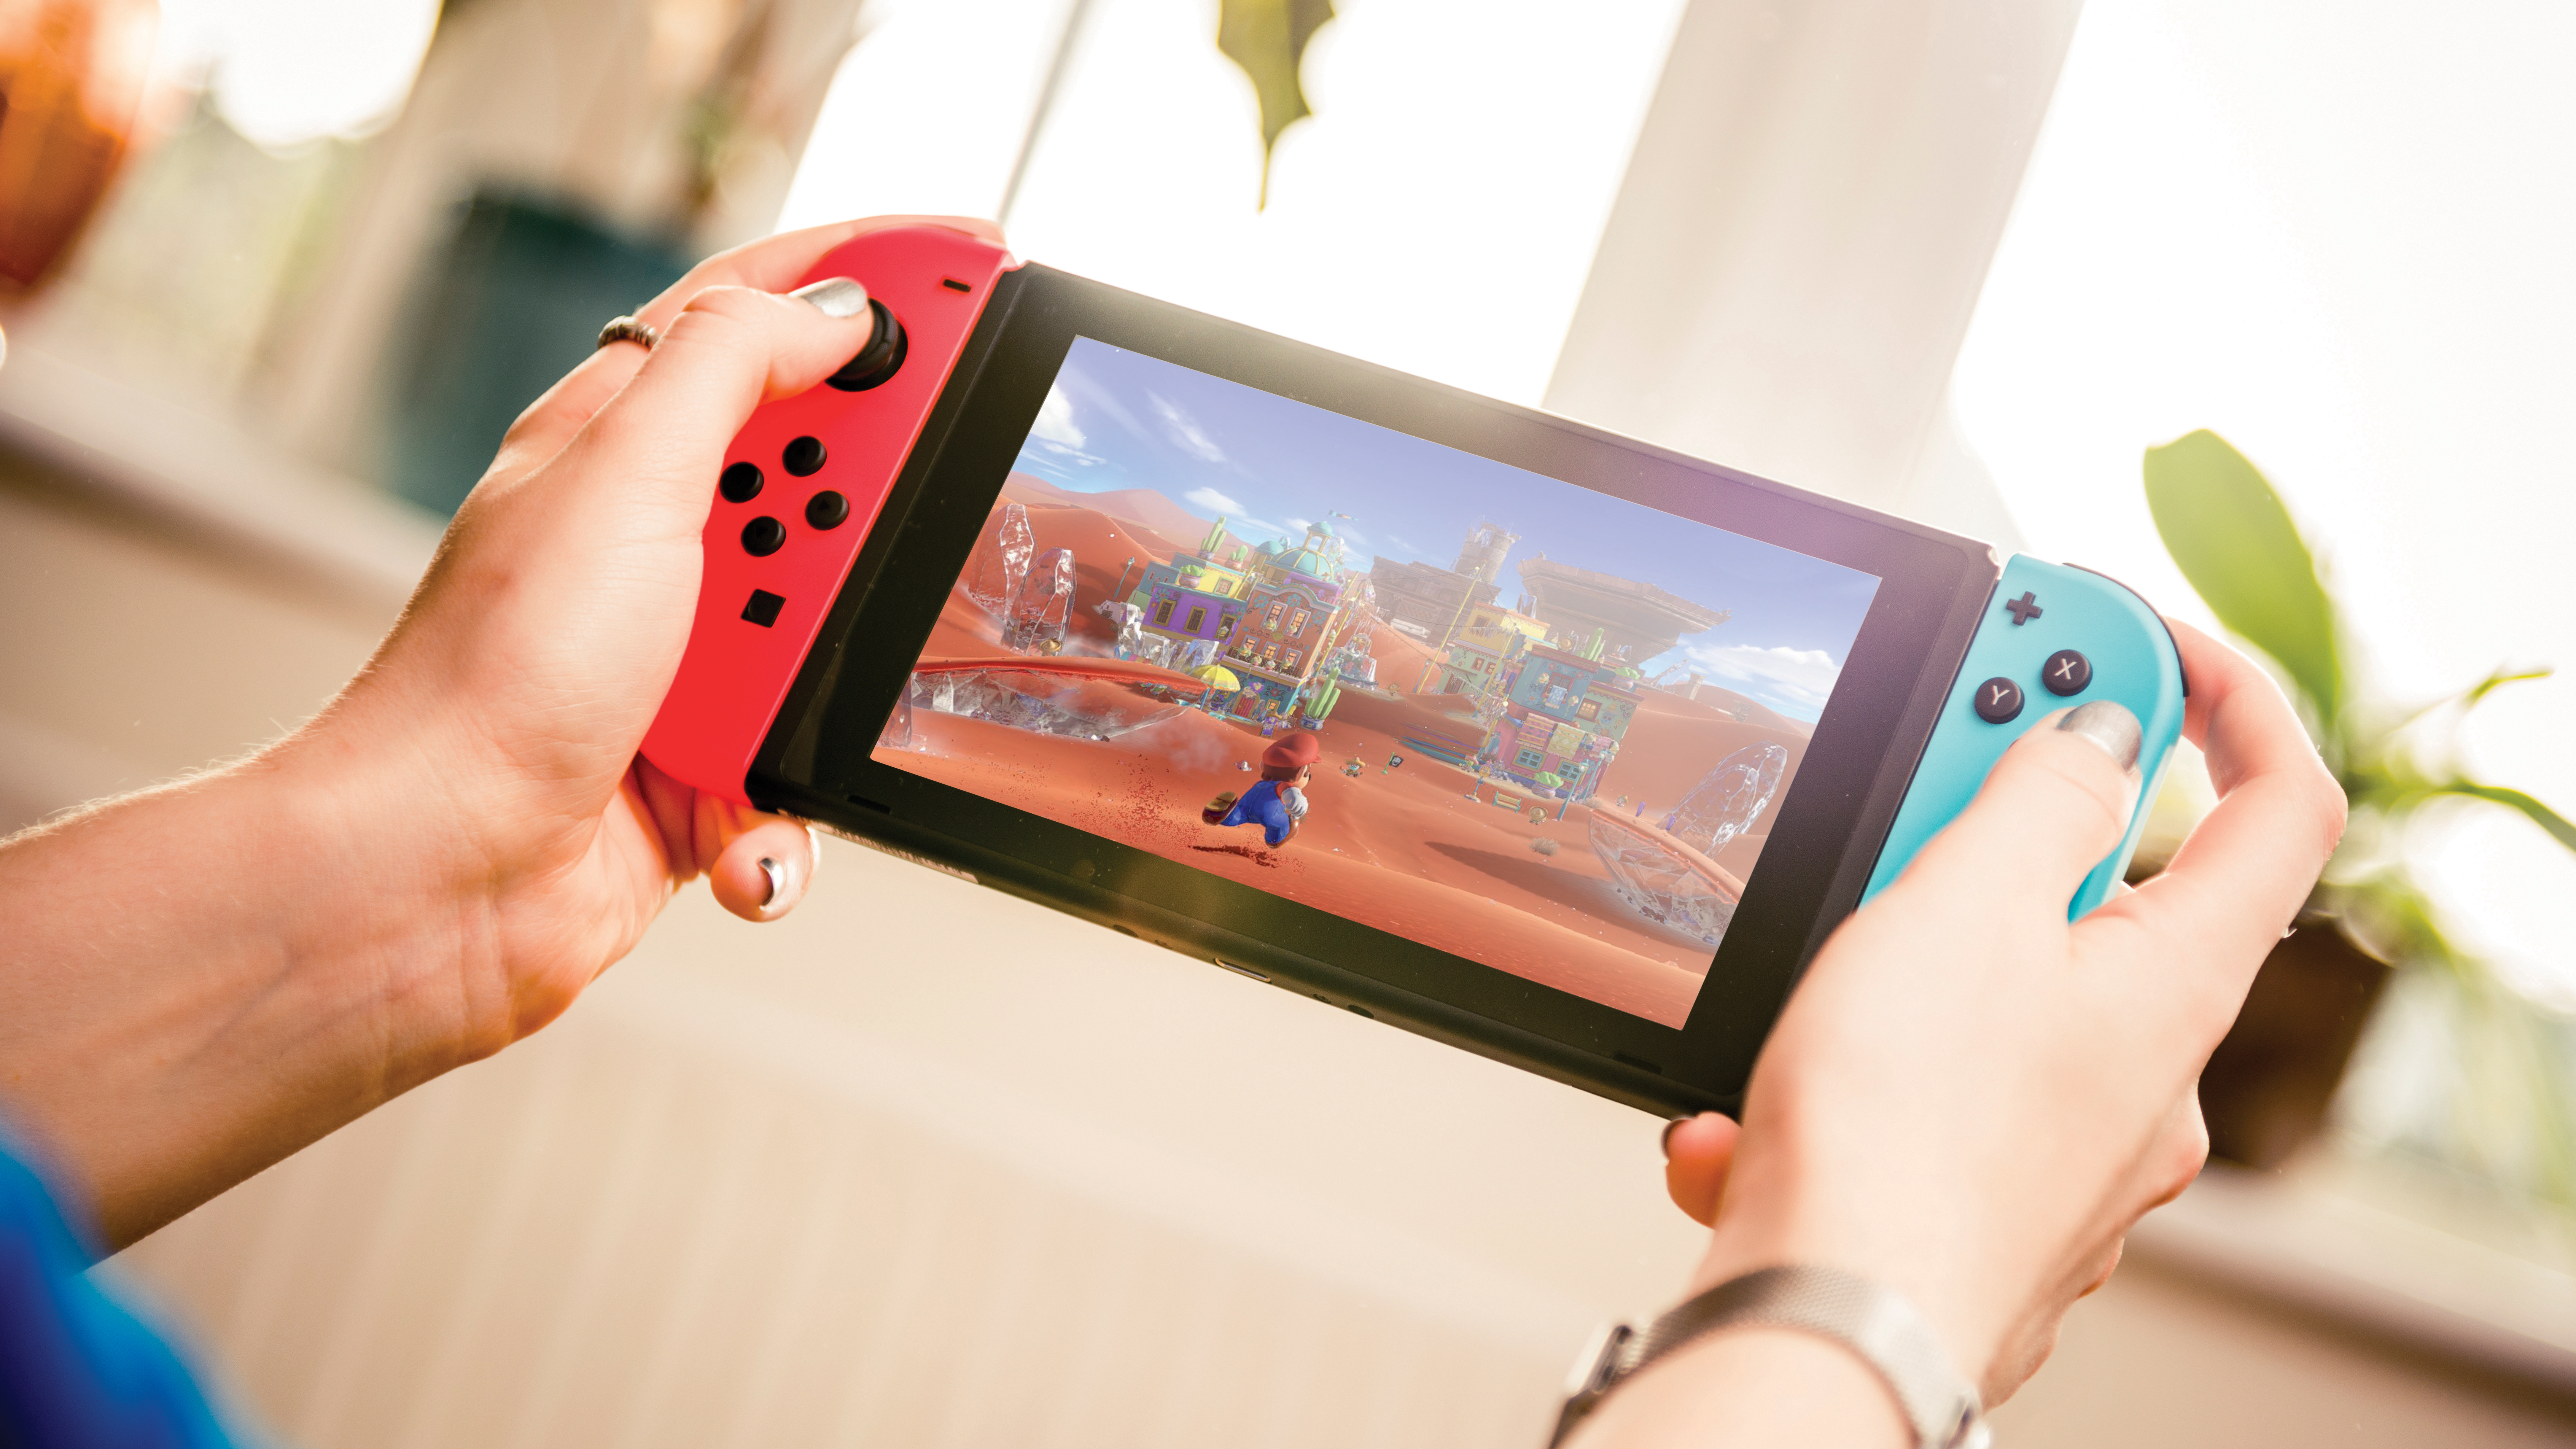 switch streaming games